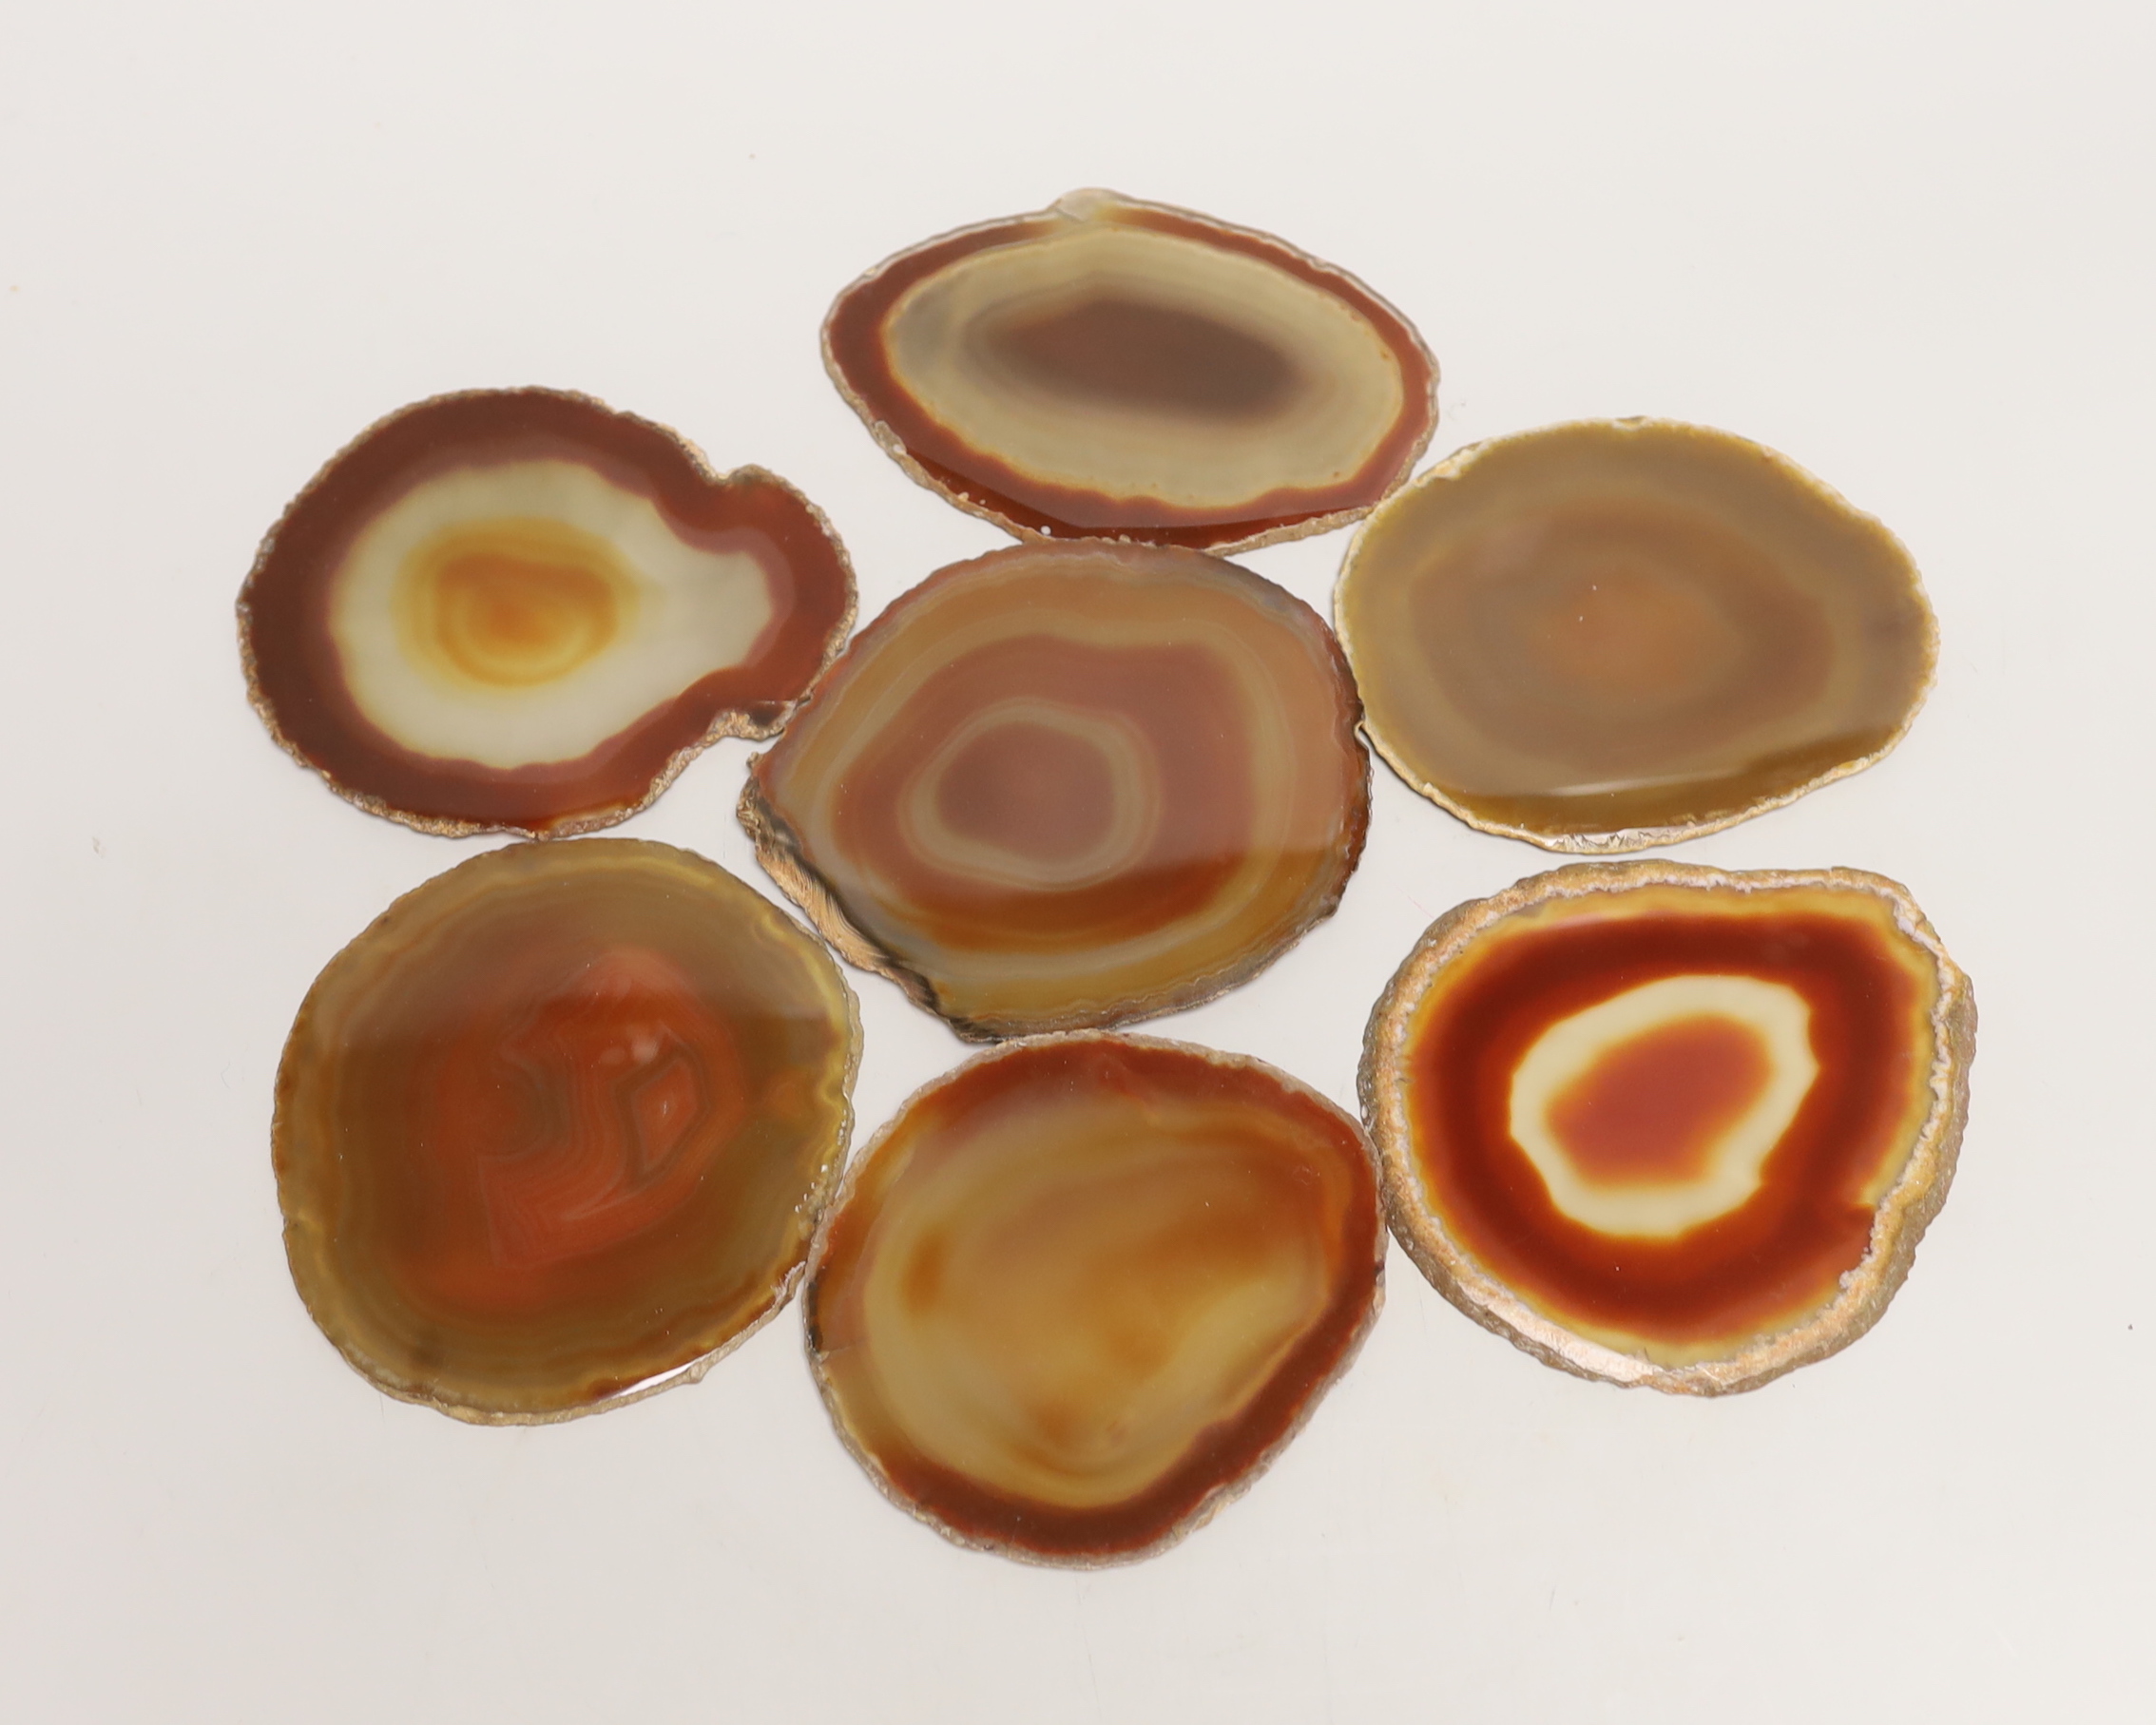 Seven assorted agates.